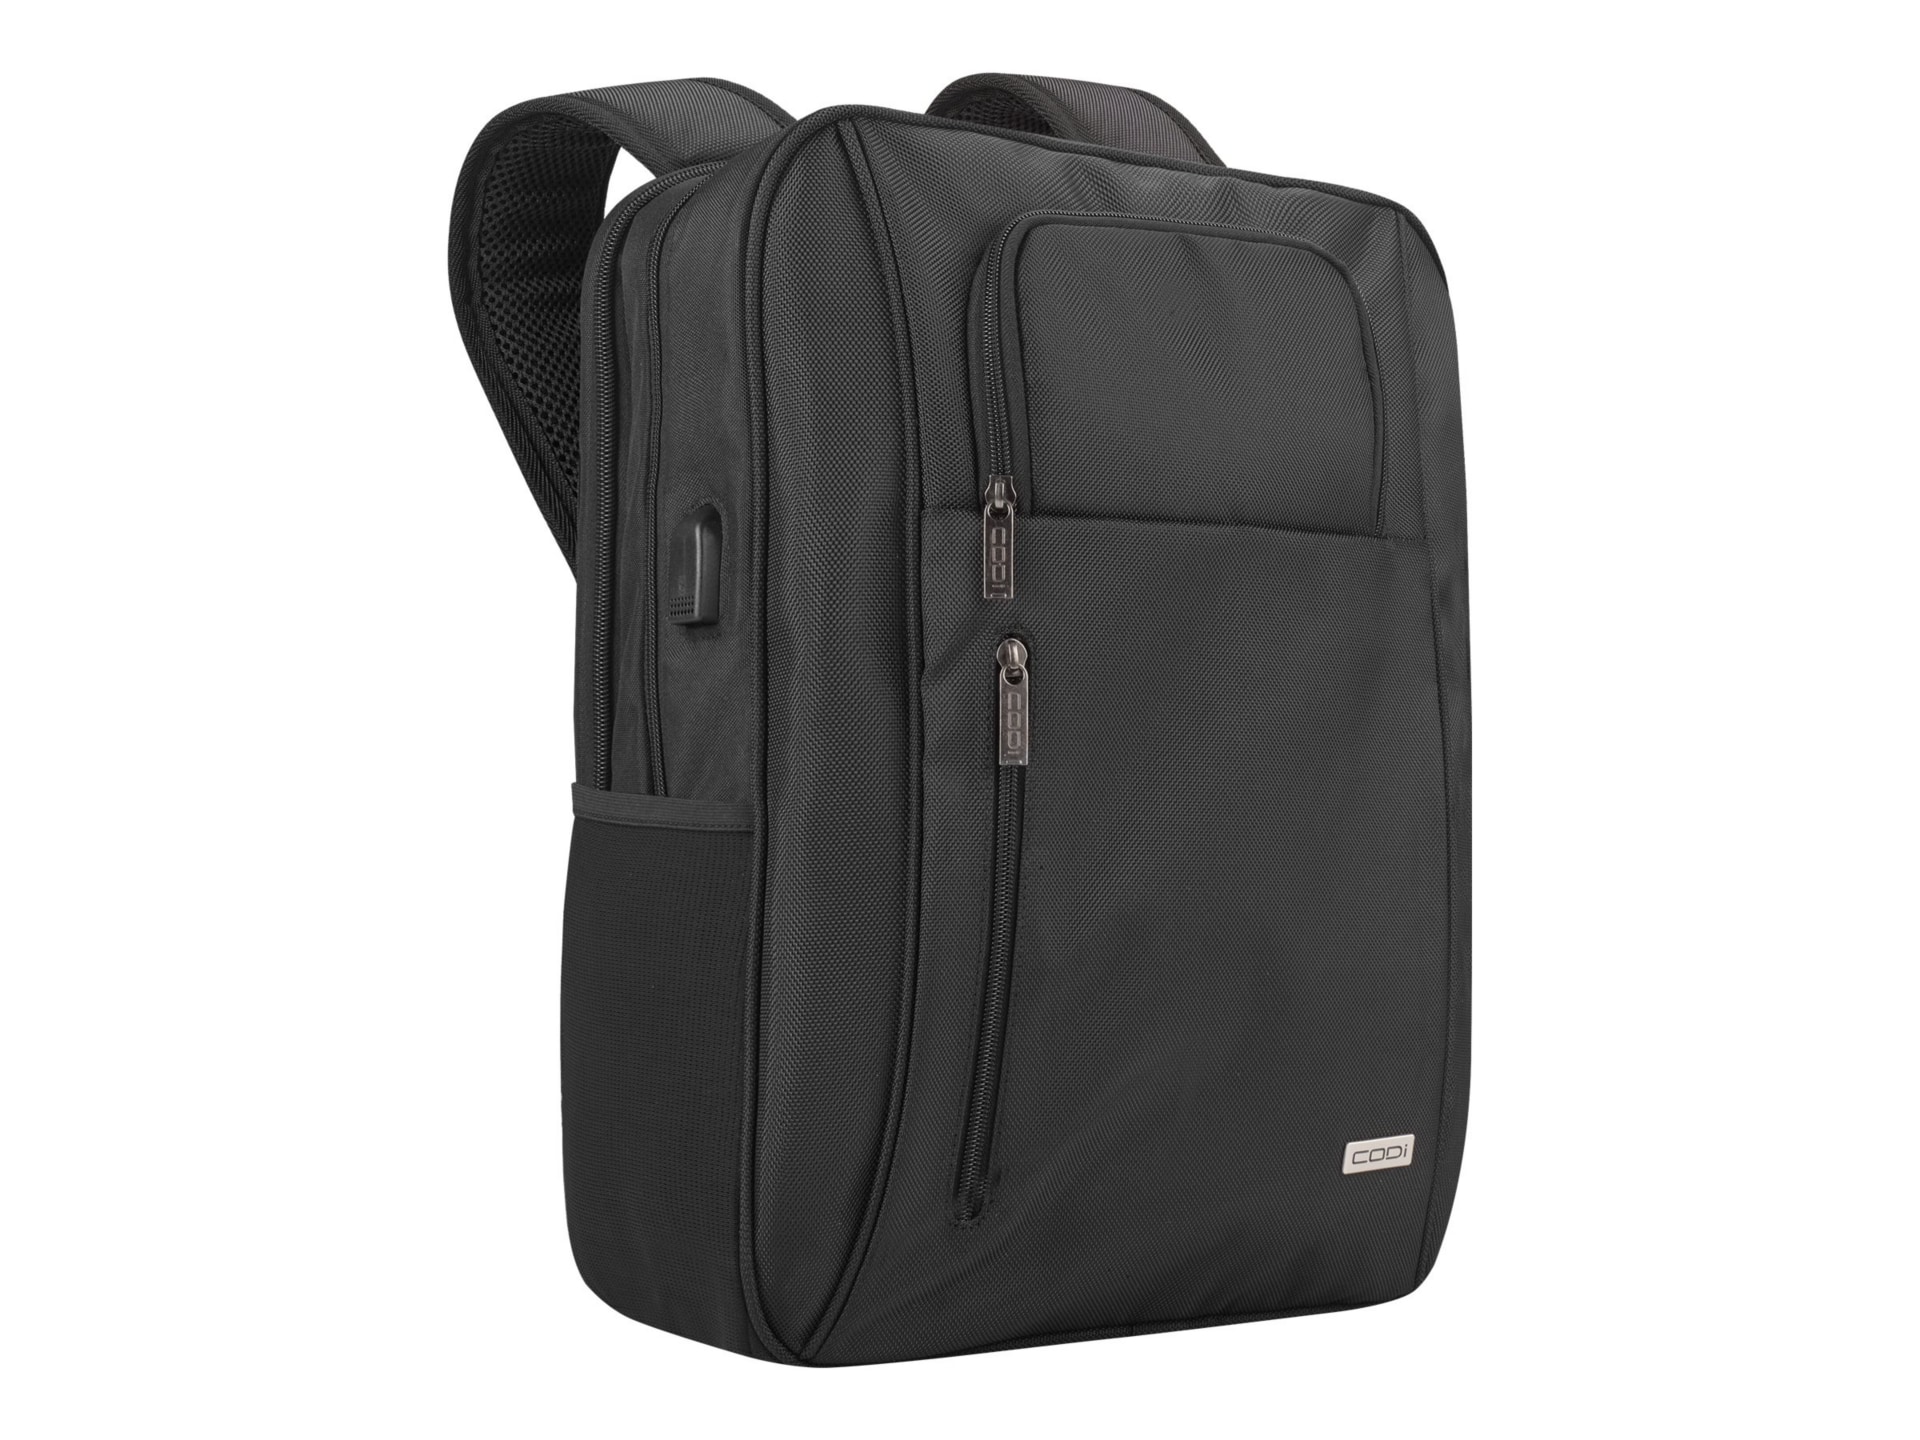 CODi Magna notebook carrying backpack - MAG702-4 - Laptop Cases & Bags ...